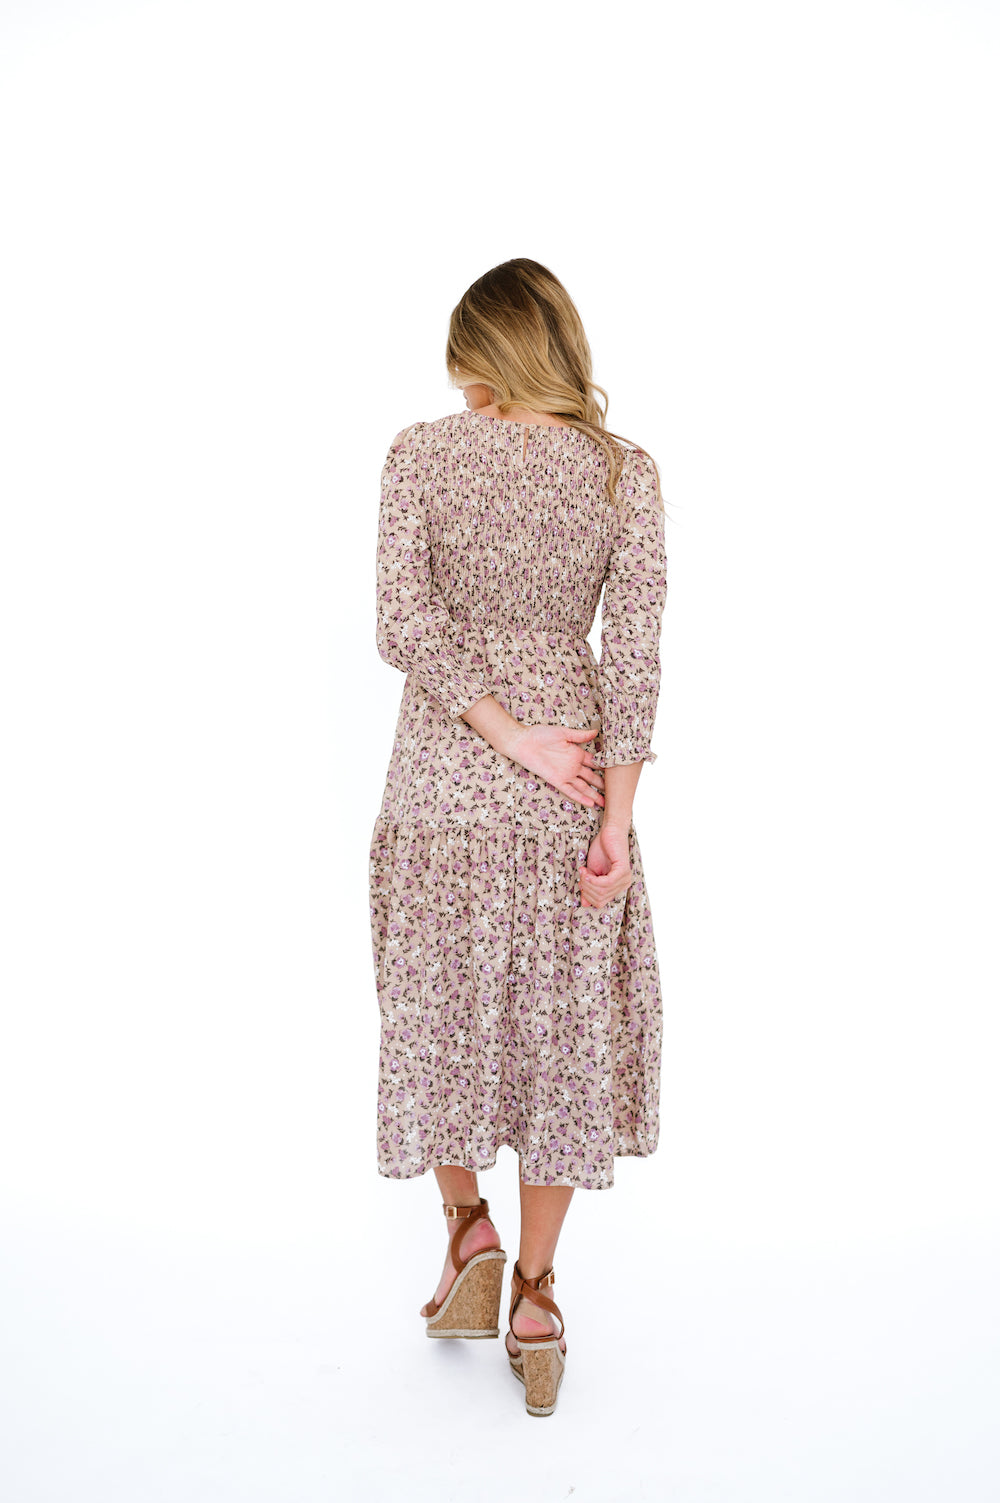 Taupe dress with purple floral print